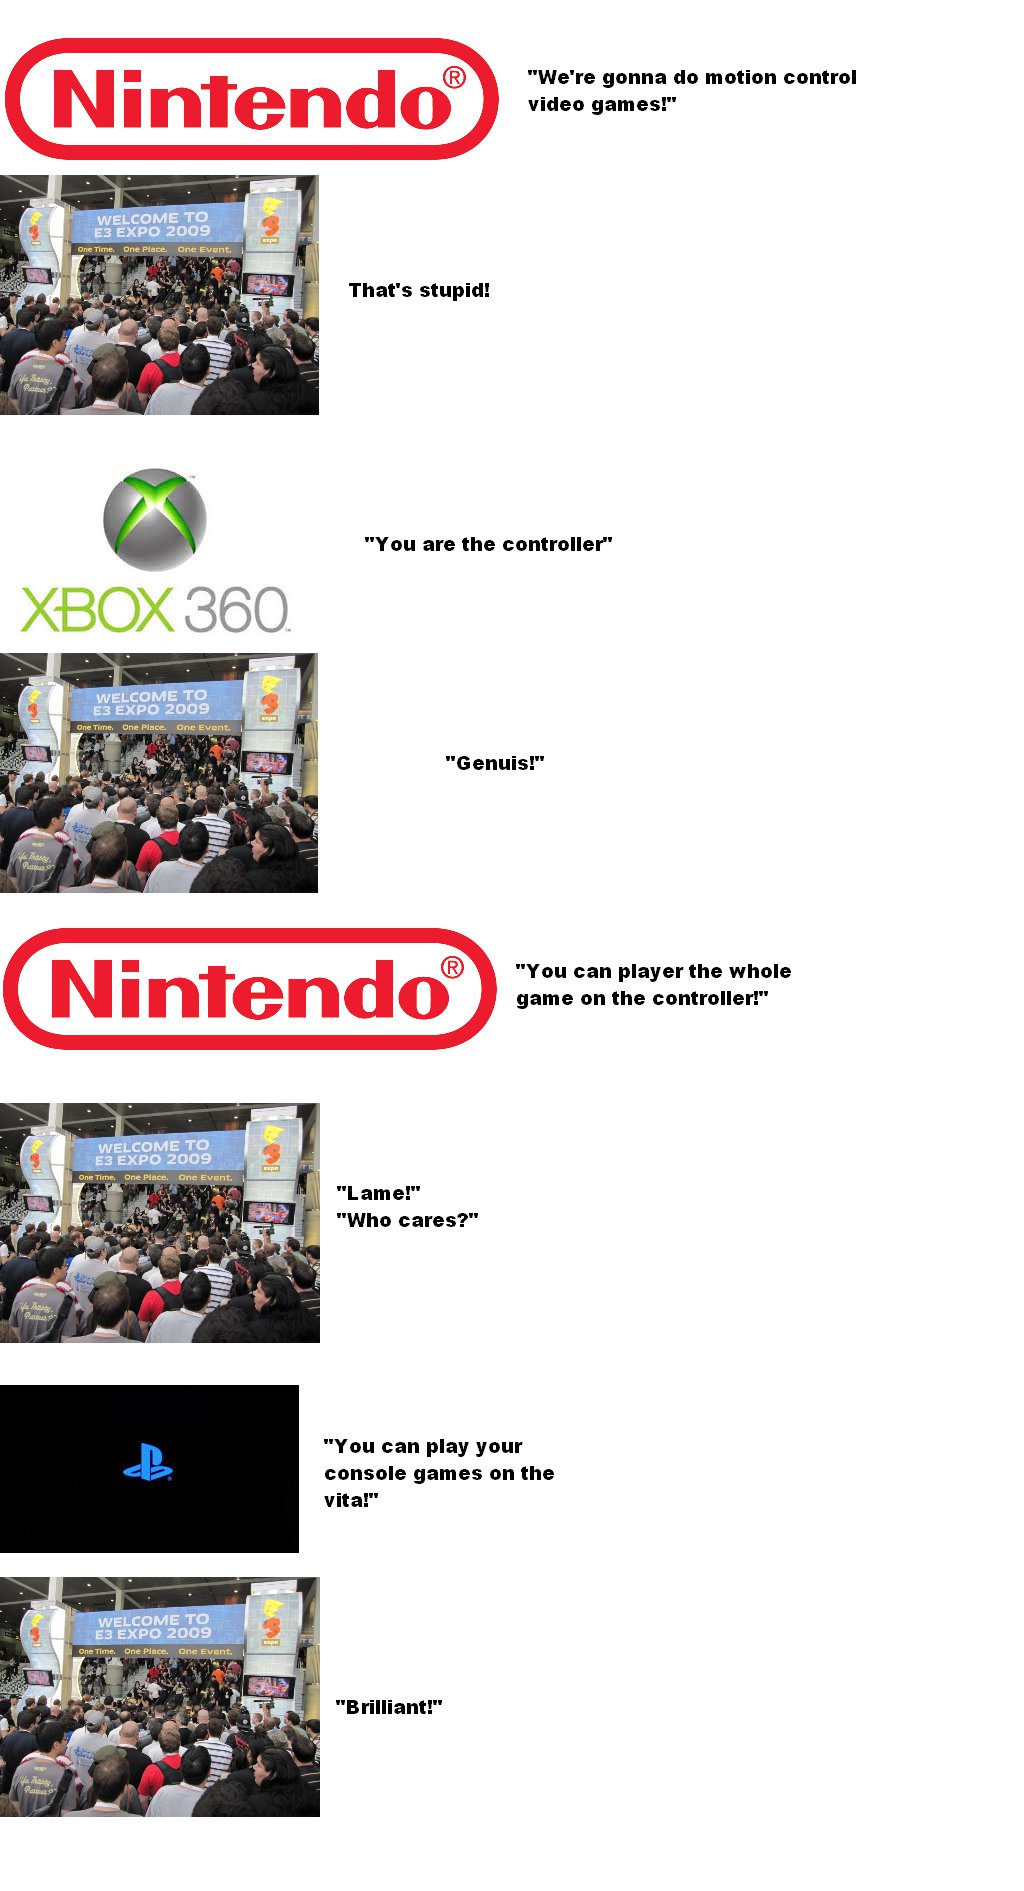 How the video game industry seems to go